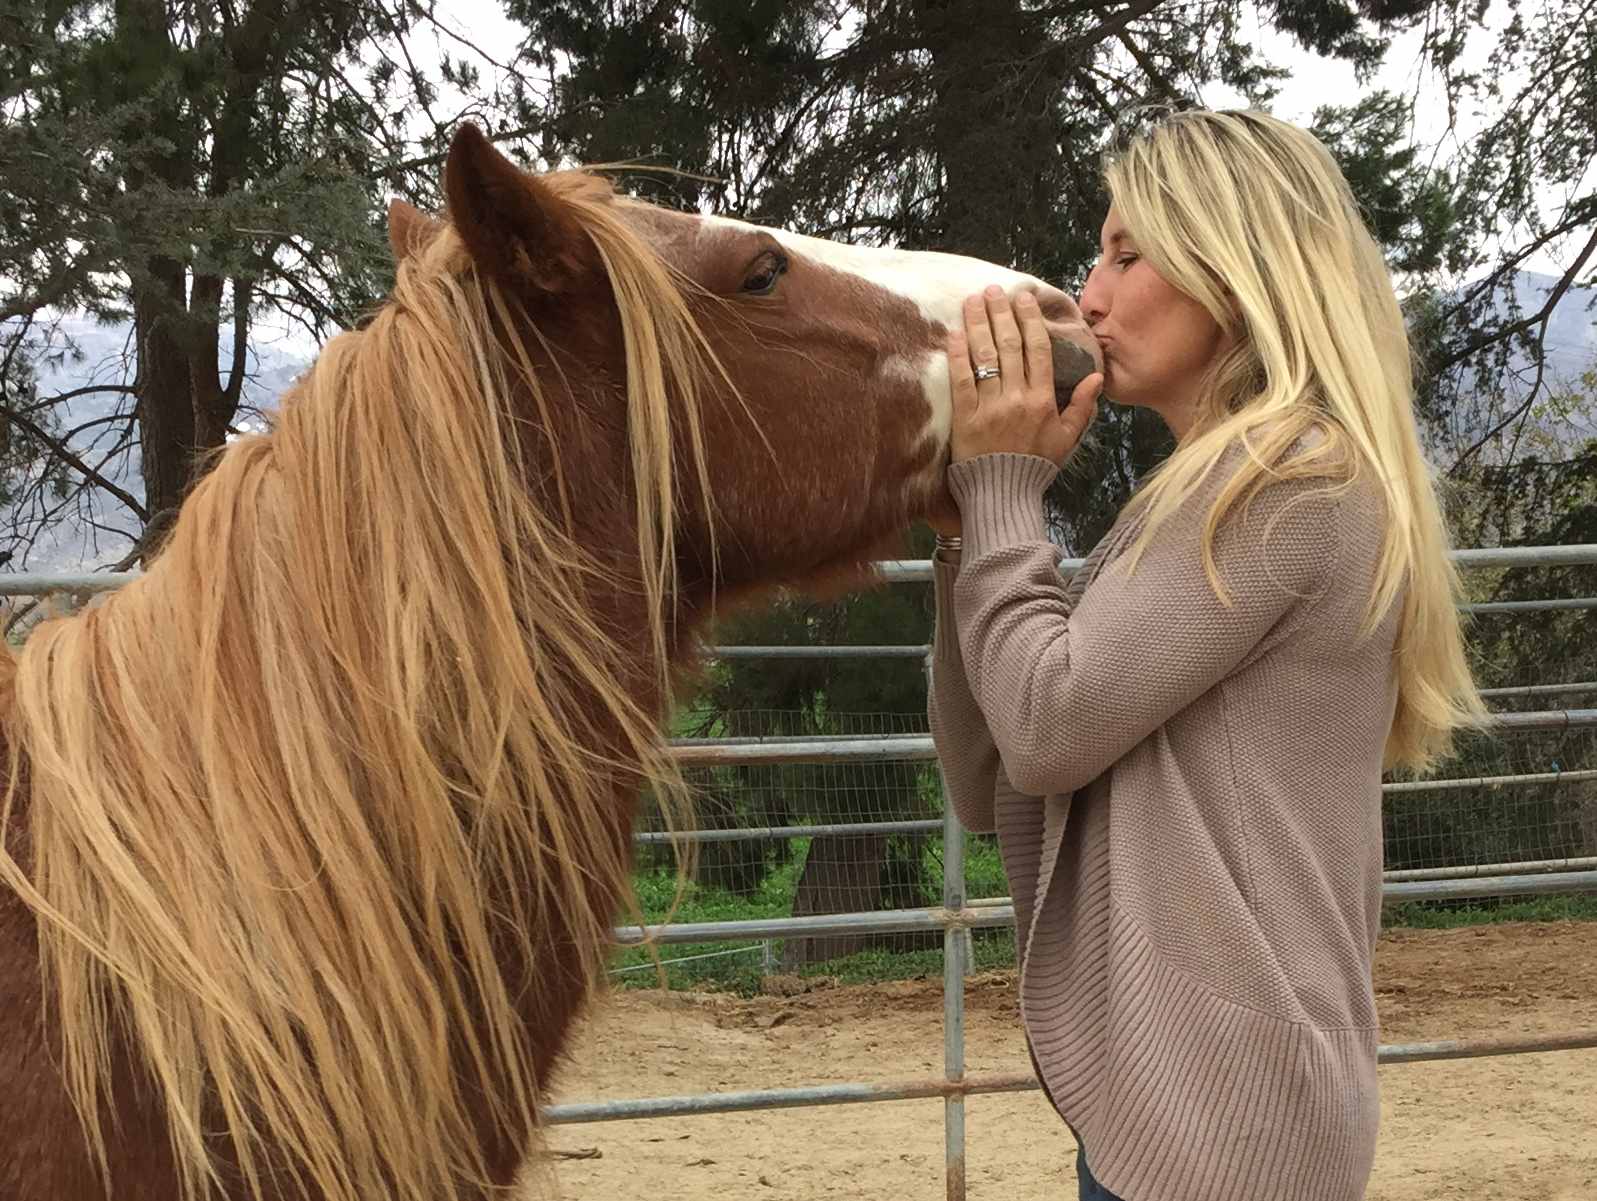 Pony Ride Owner Sues Animal Rights Activists for Defamation